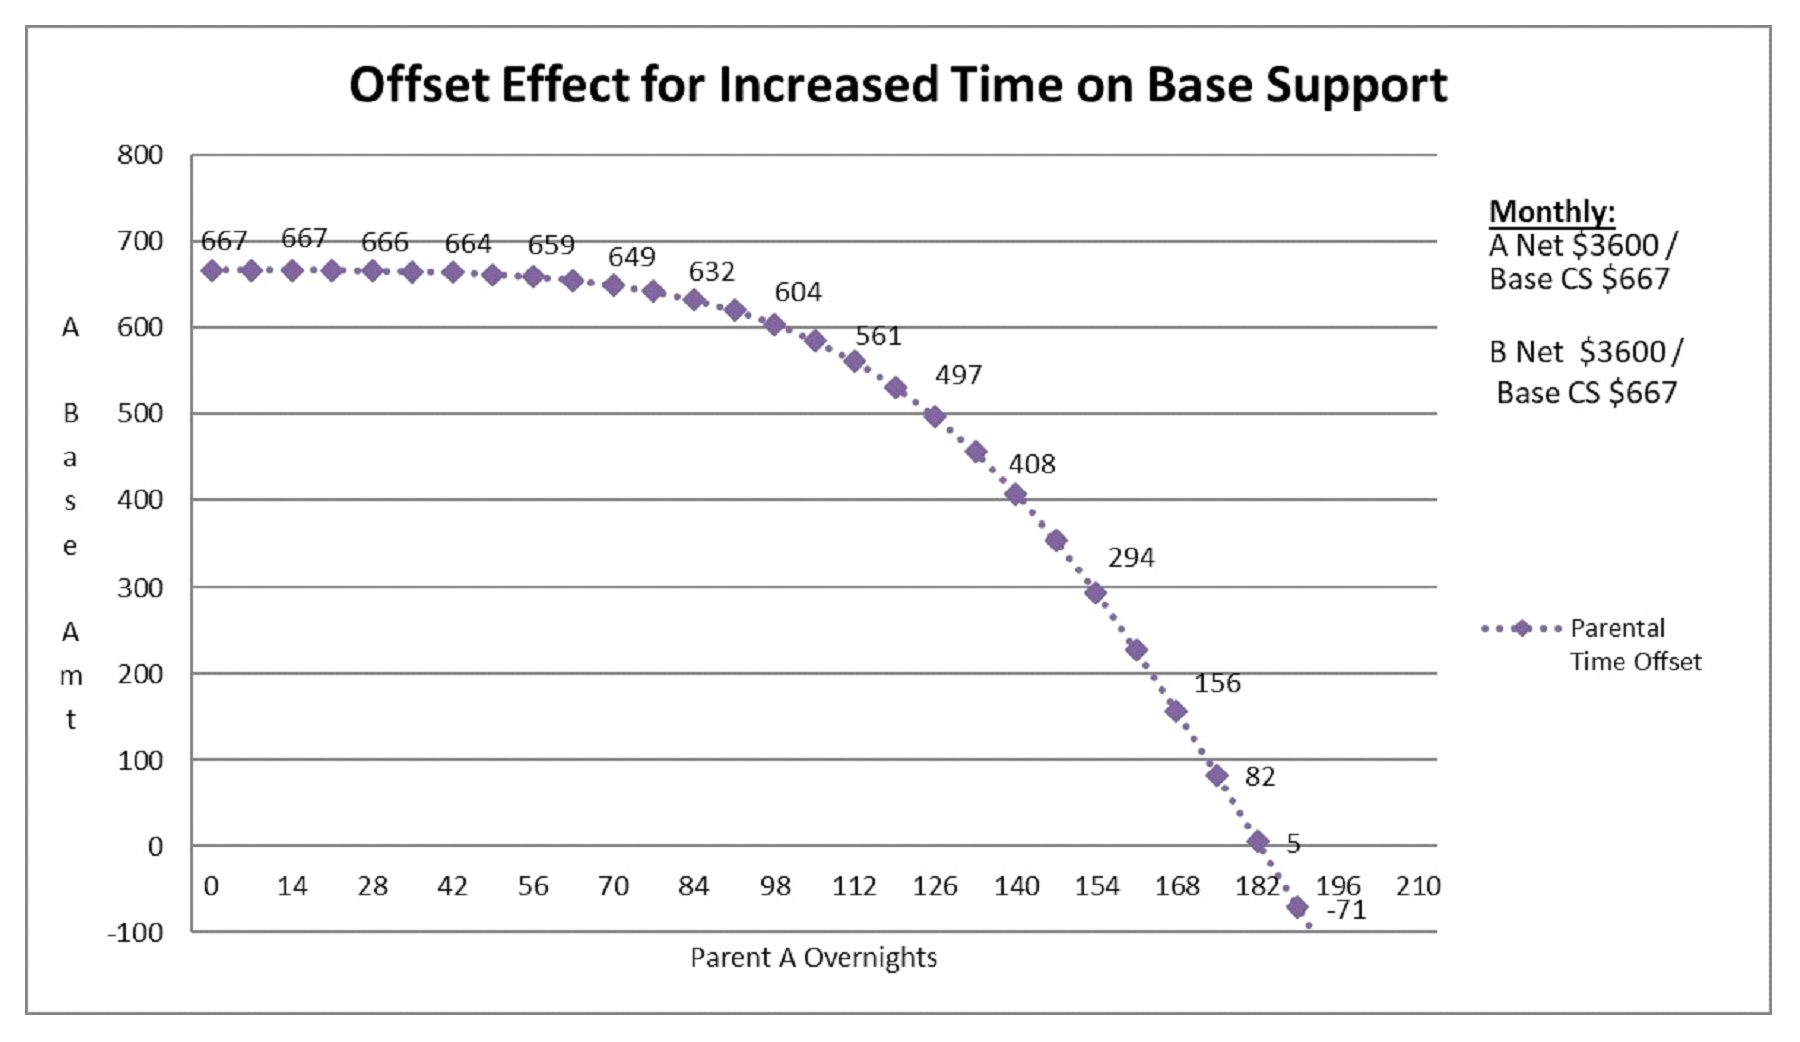 Is Base Monthly Child Support Ever Too High? Can High-Income